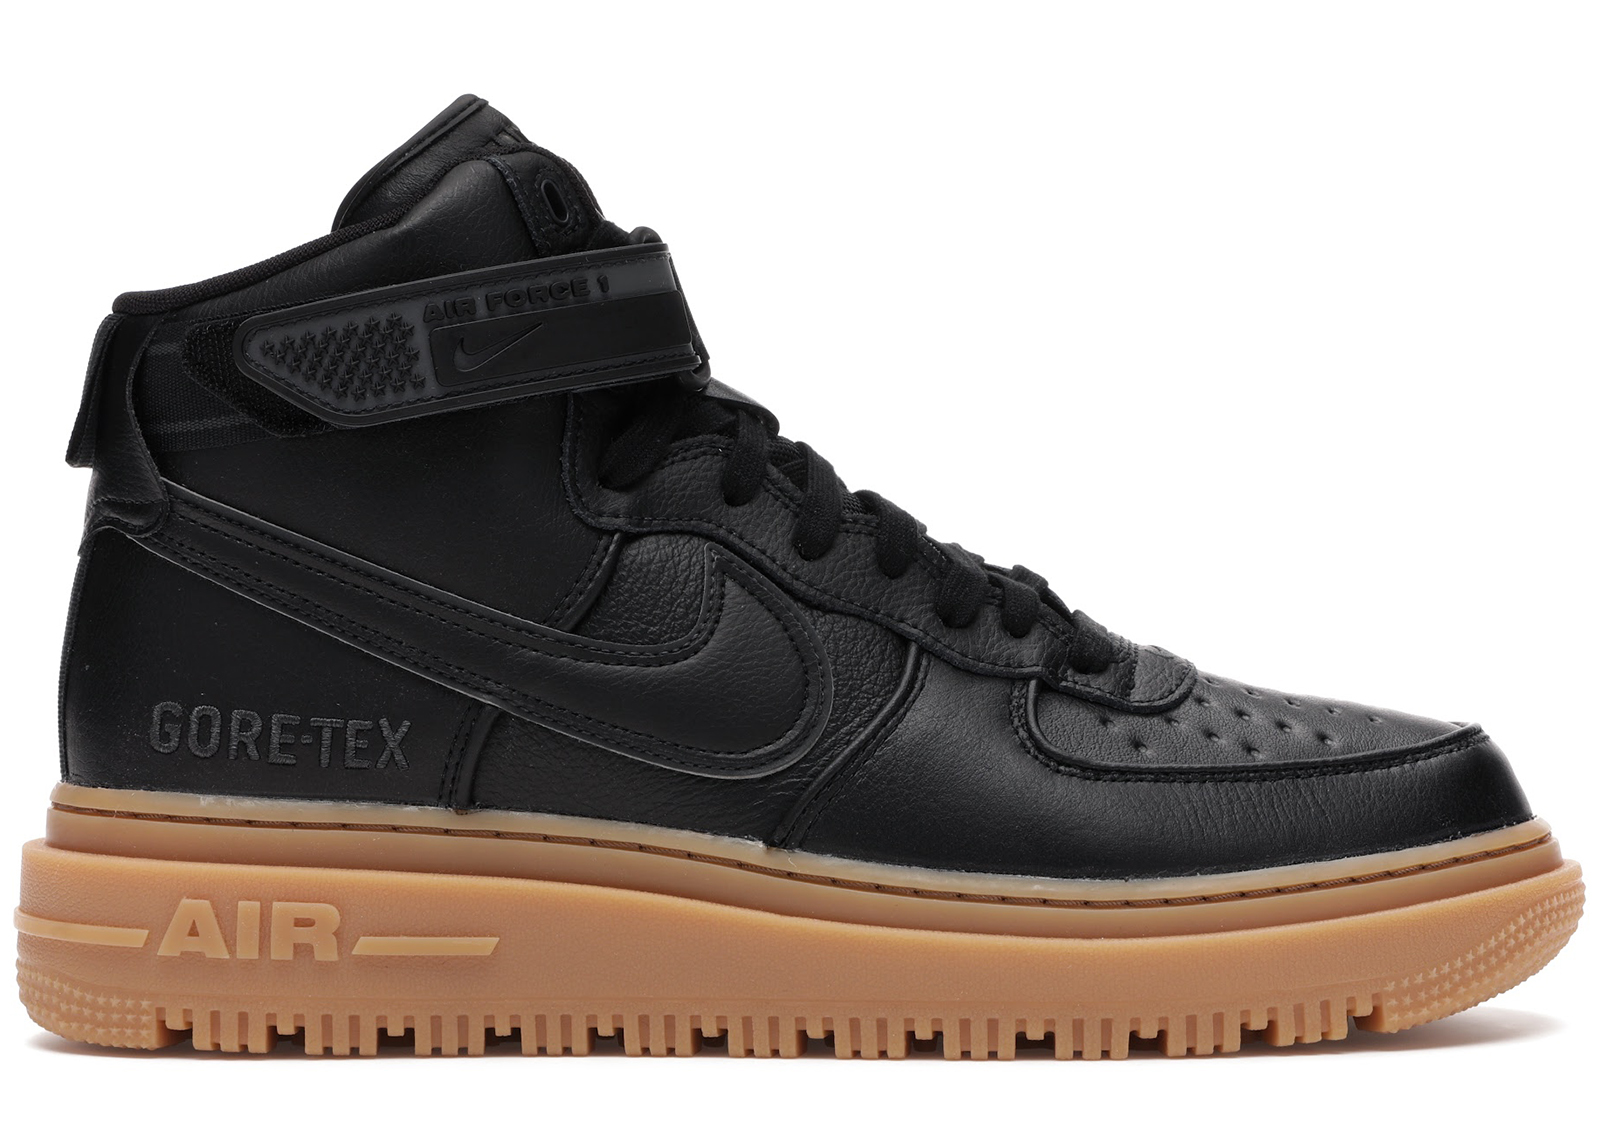 Nike Air Force 1 High Gore-Tex Boot Anthracite Men's - CT2815-001 - US